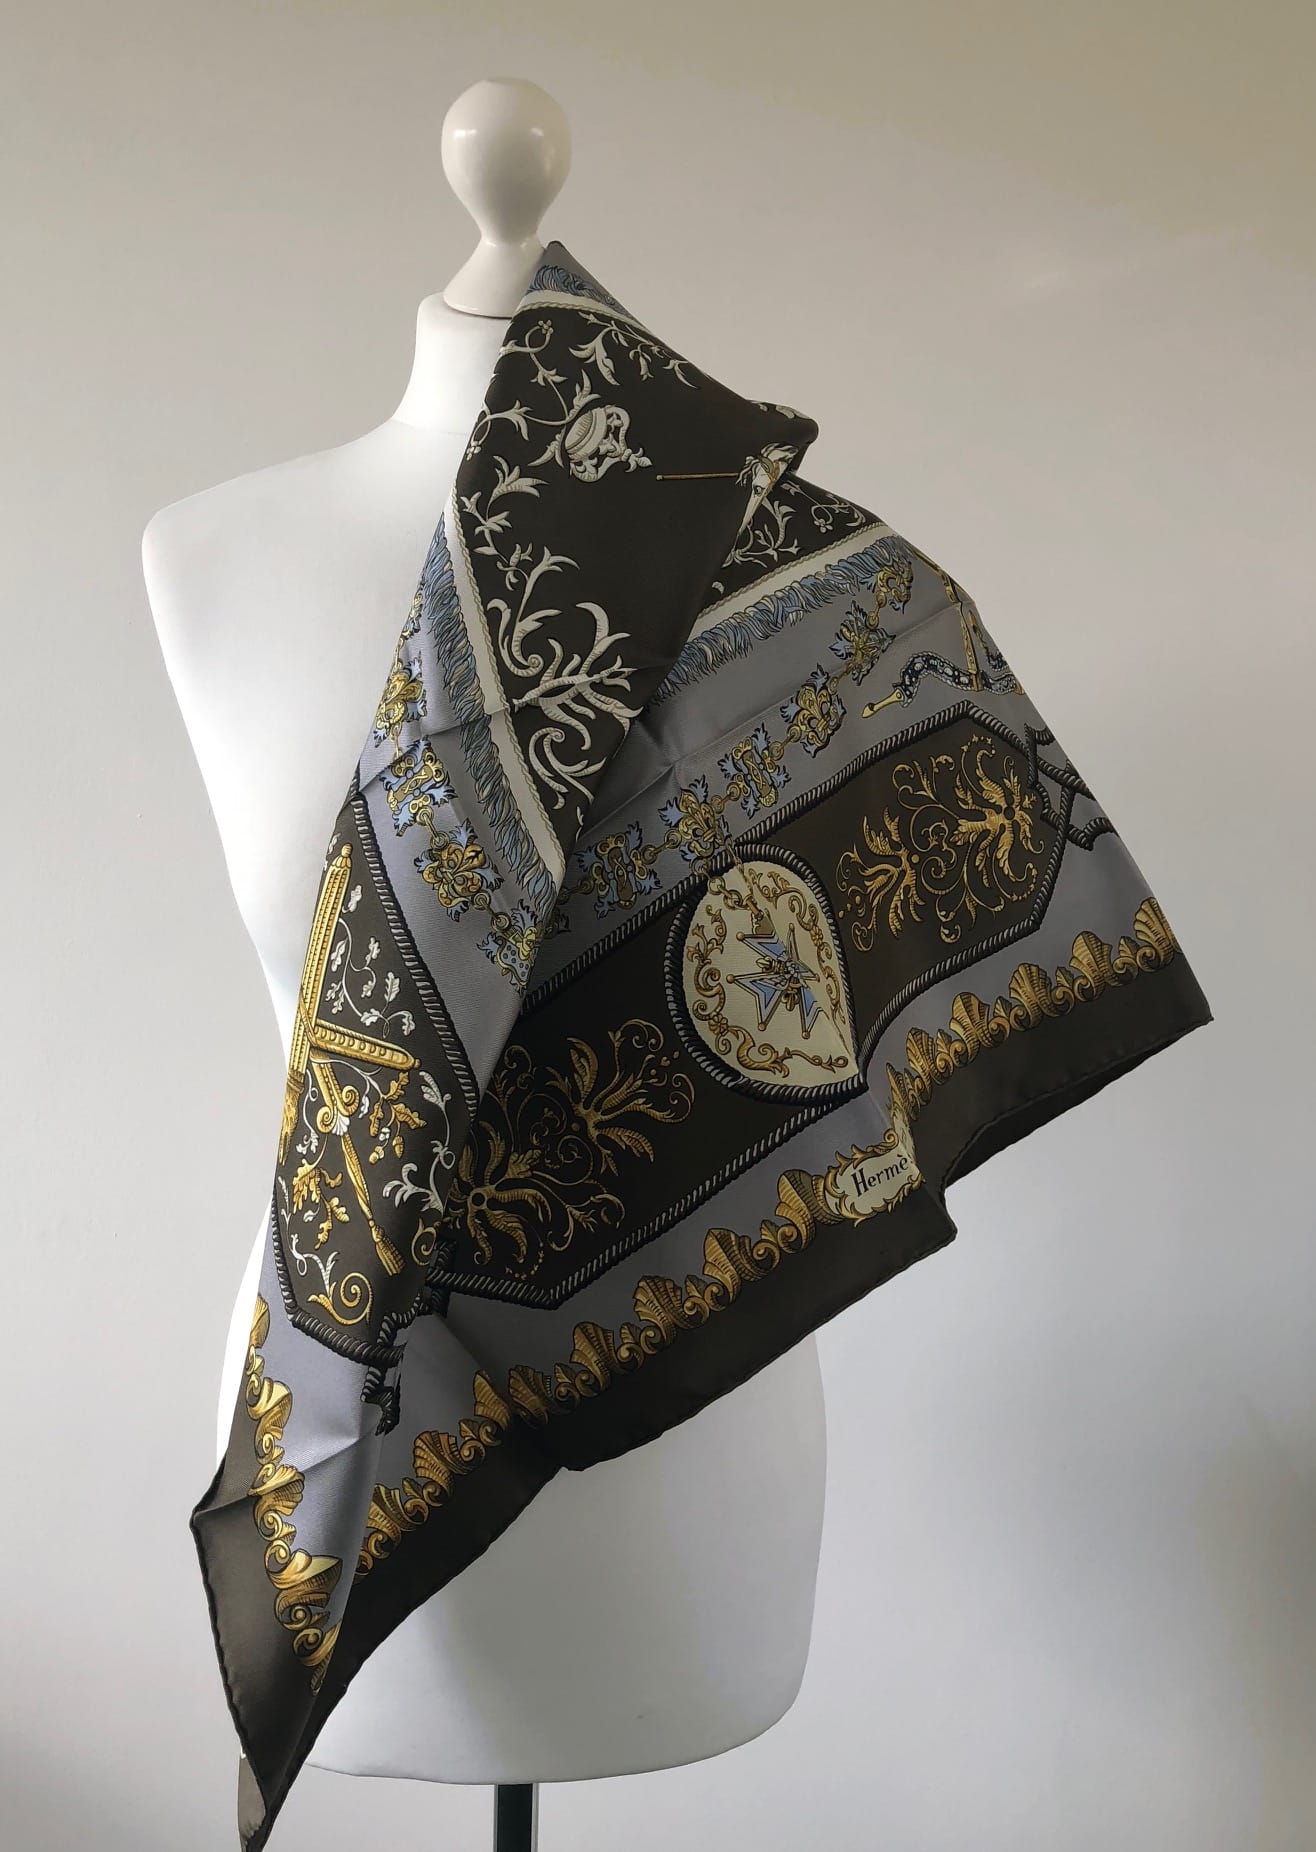 Louis Xiv - Ludovicus Magnus' Silk Scarf by Hermès in Burgundy color for  Luxury Clothing